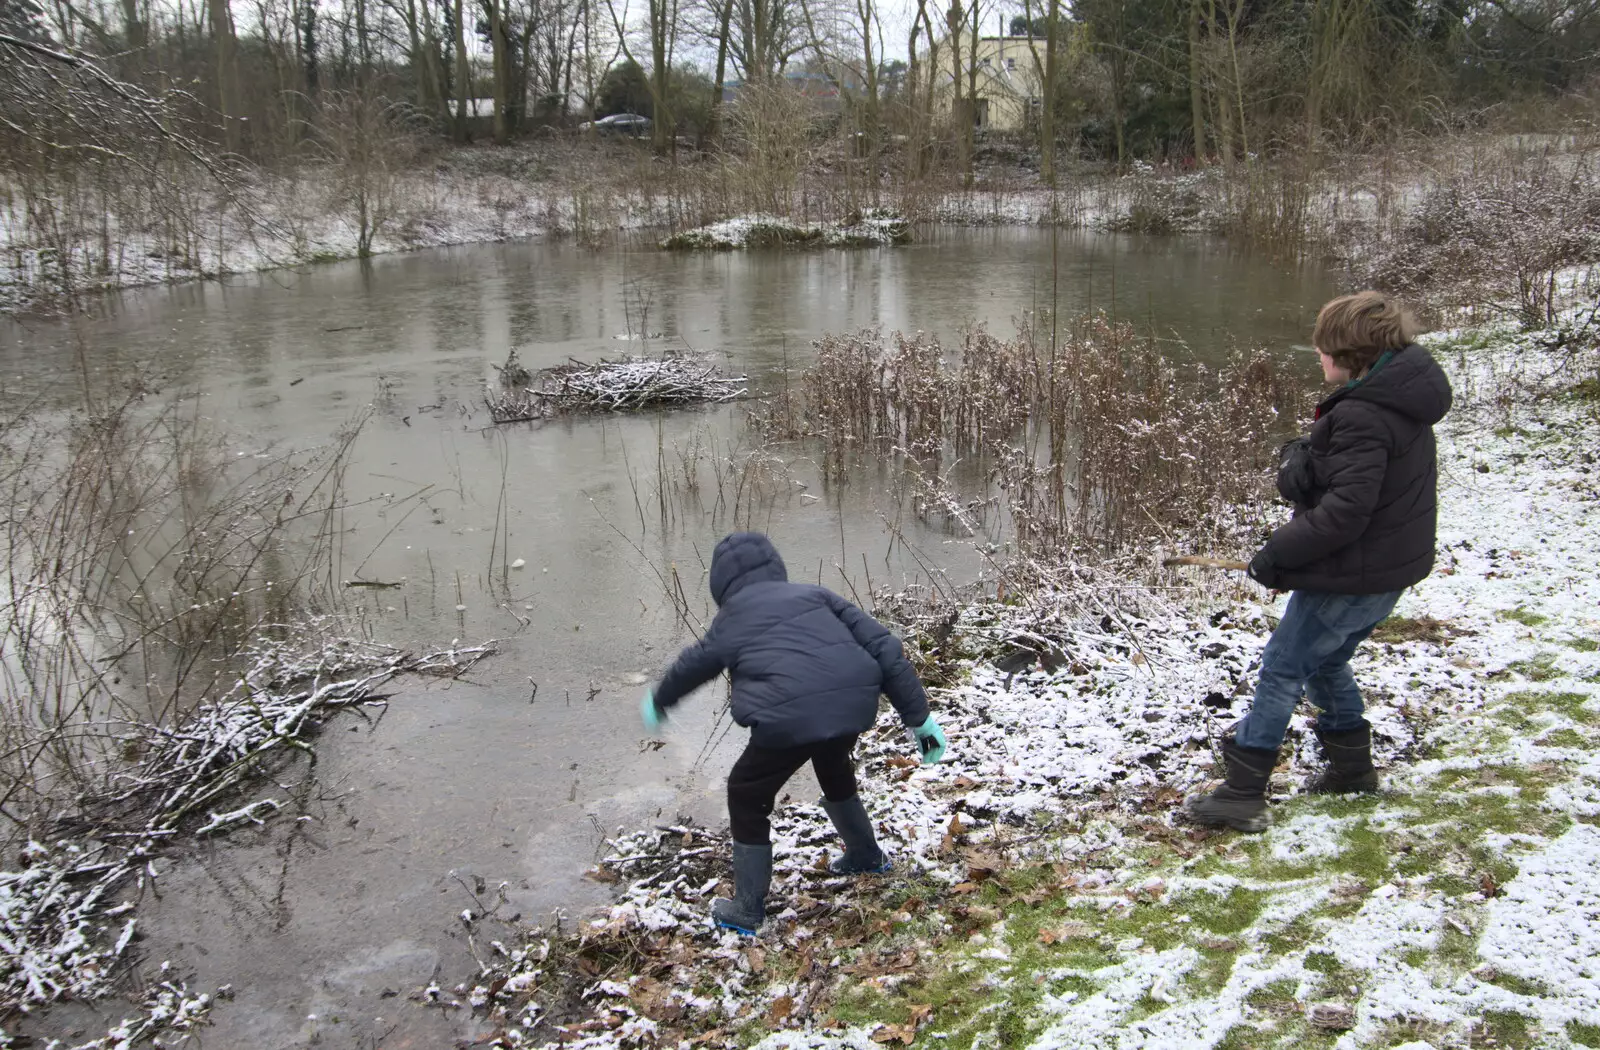 The boys mess around by the new pond, from Winter Lockdown Walks, Thrandeston and Brome, Suffolk - 24th January 2021